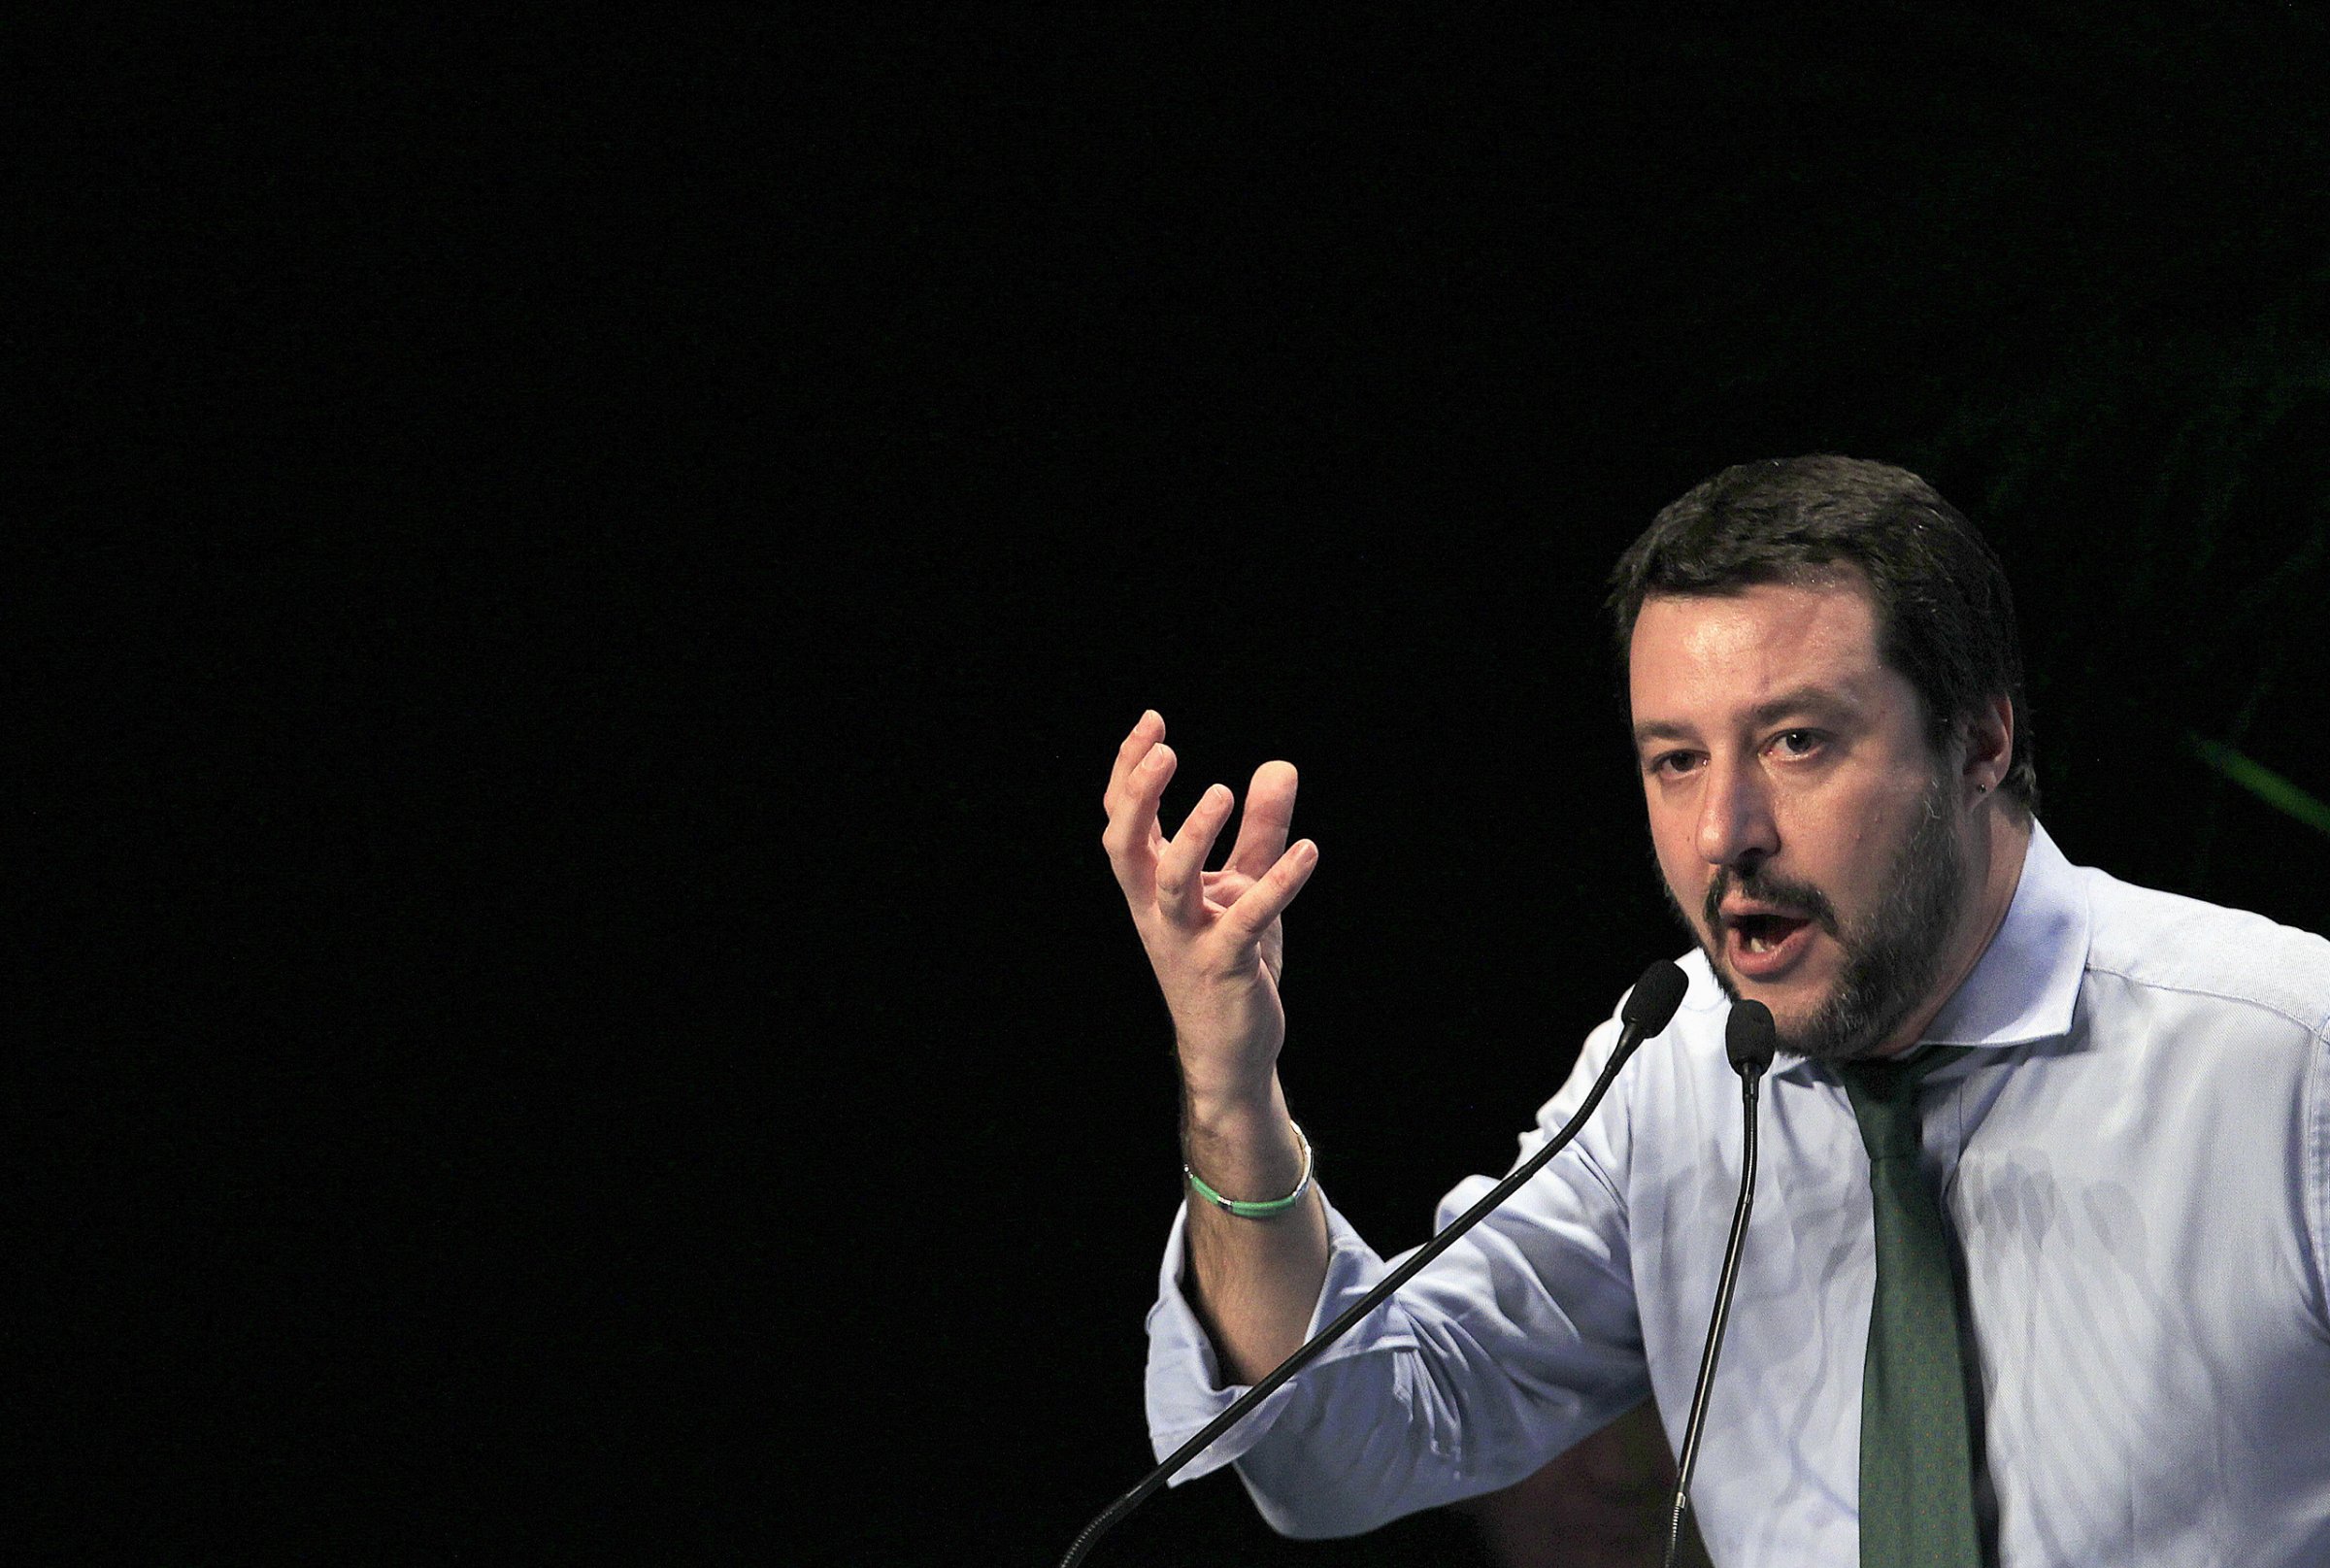 Northern League leader Matteo Salvini gestures during the "Europe of Nations and Freedom" meeting in Milan, January 28, 2016. REUTERS/Alessandro Garofalo - RTX24GNK